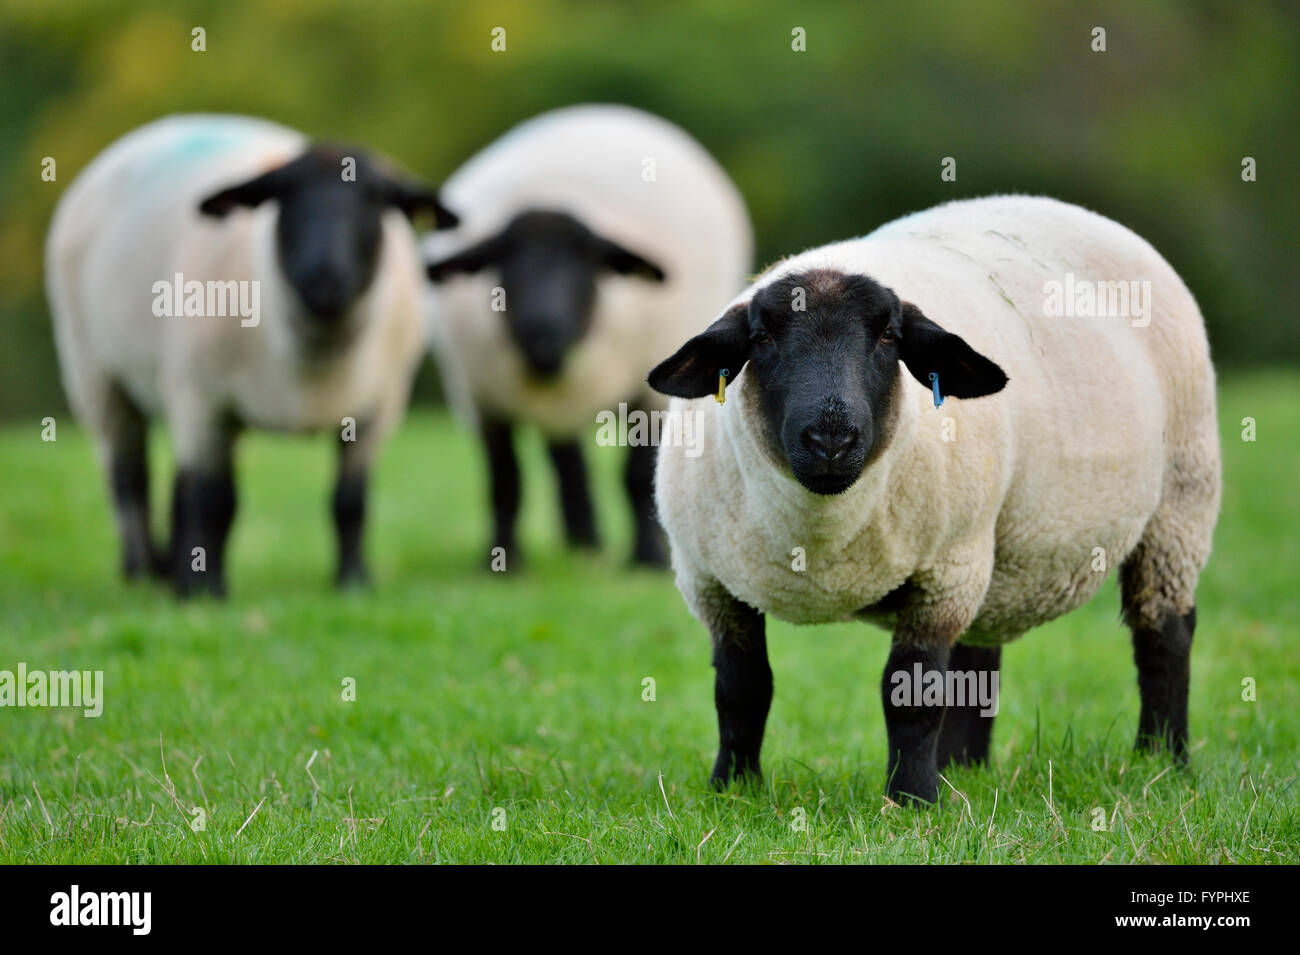 Sheep (Ovis aries) in a field, UK Stock Photo